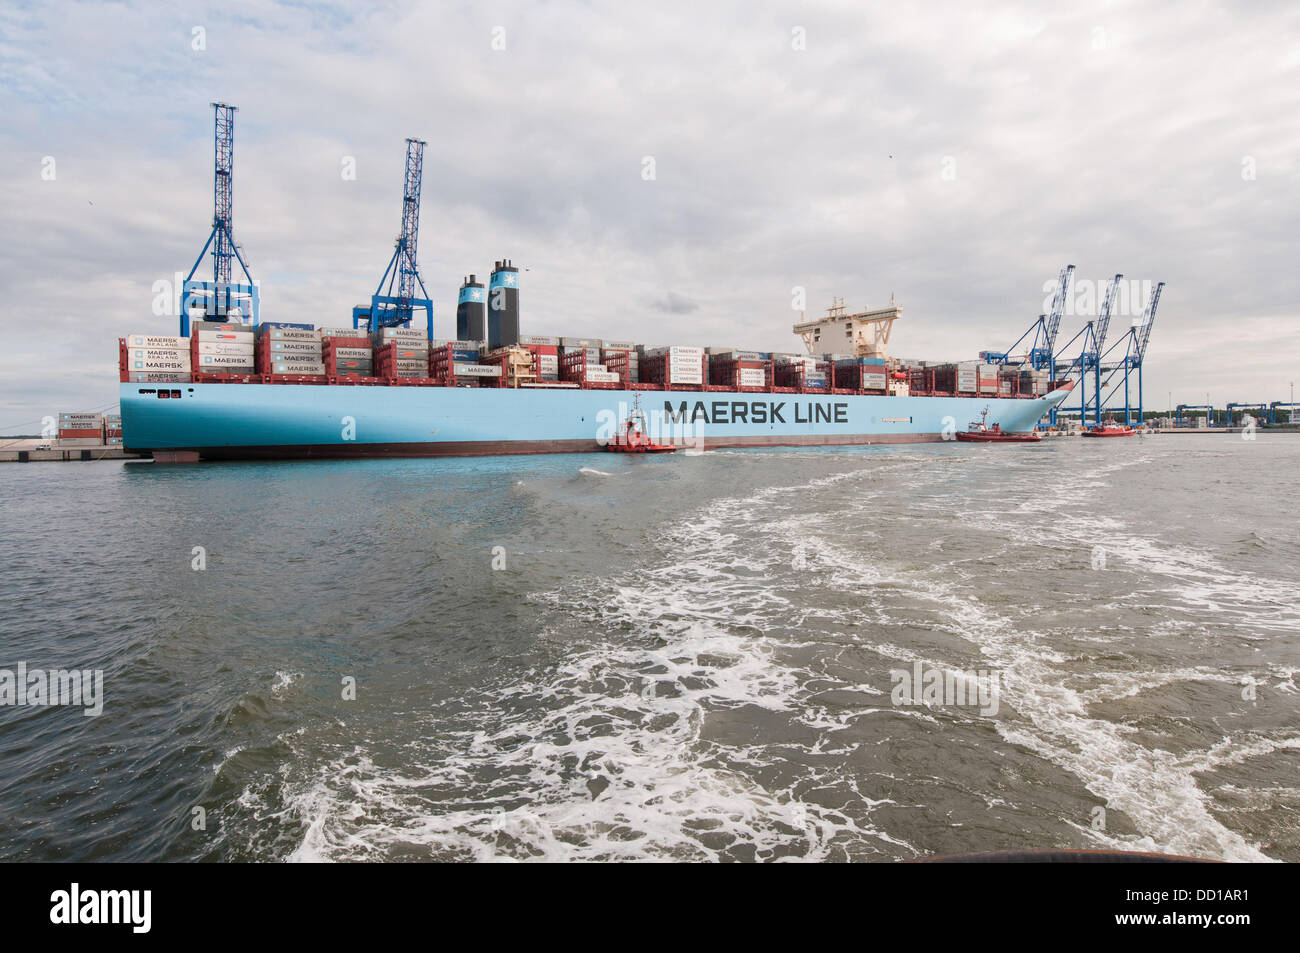 GDANSK, POLAND. 21st August , 2013. World largest container ship Maersk Mc-Kinney Møller Triple E class vessel operated by Maersk Line from Denmark arrives to Gdansk's Deepwater Container Terminal 1 (DCT) in Gdansk during it's first journey from Asia to Europe. The ship is 400 meters long, 59 meters wide and 100 meters high. It has cargo capacity of 18,270 TEU containers. DCT is the one and only port on the Baltic side of the Danish Straits that can manage so huge ships. Credit:  kpzfoto/Alamy Live News Stock Photo